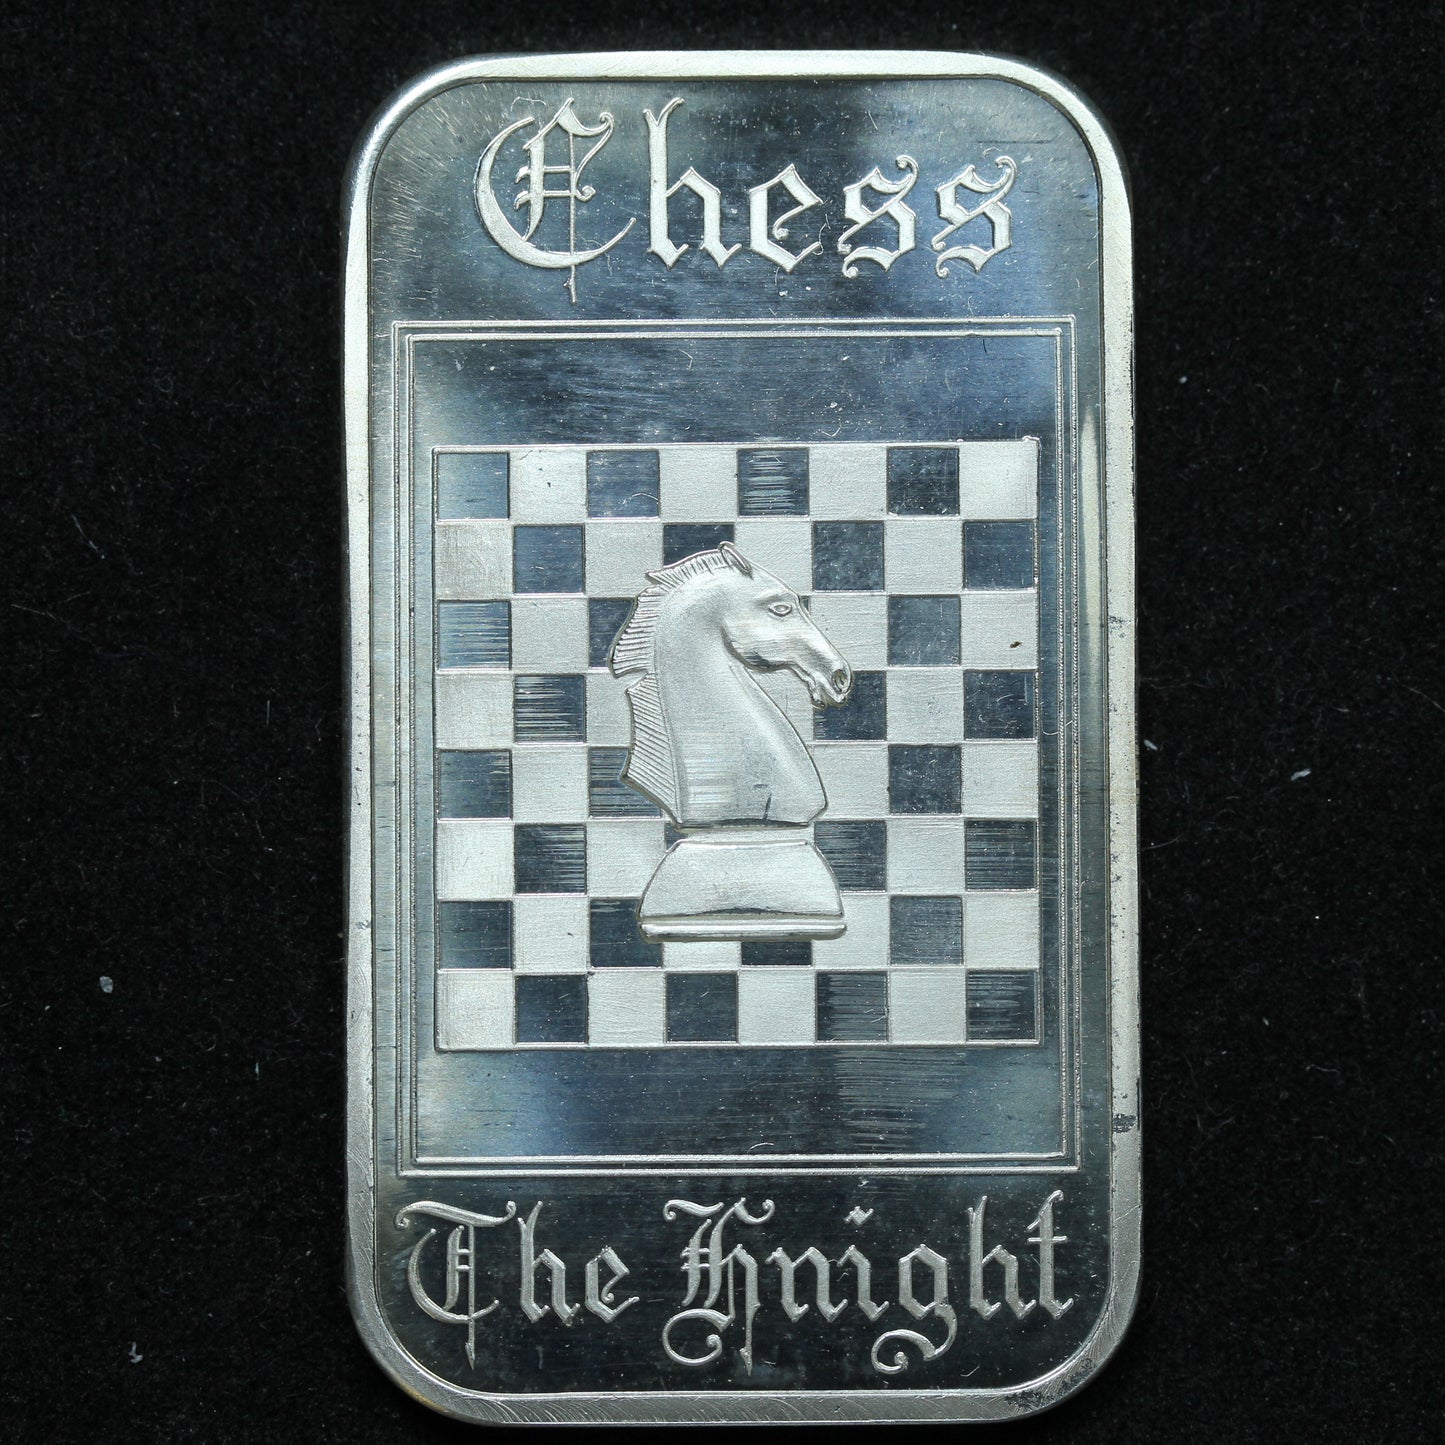 1 oz .999 Fine Silver - Madison Mint - Chess 'The Knight' w/ Capsule